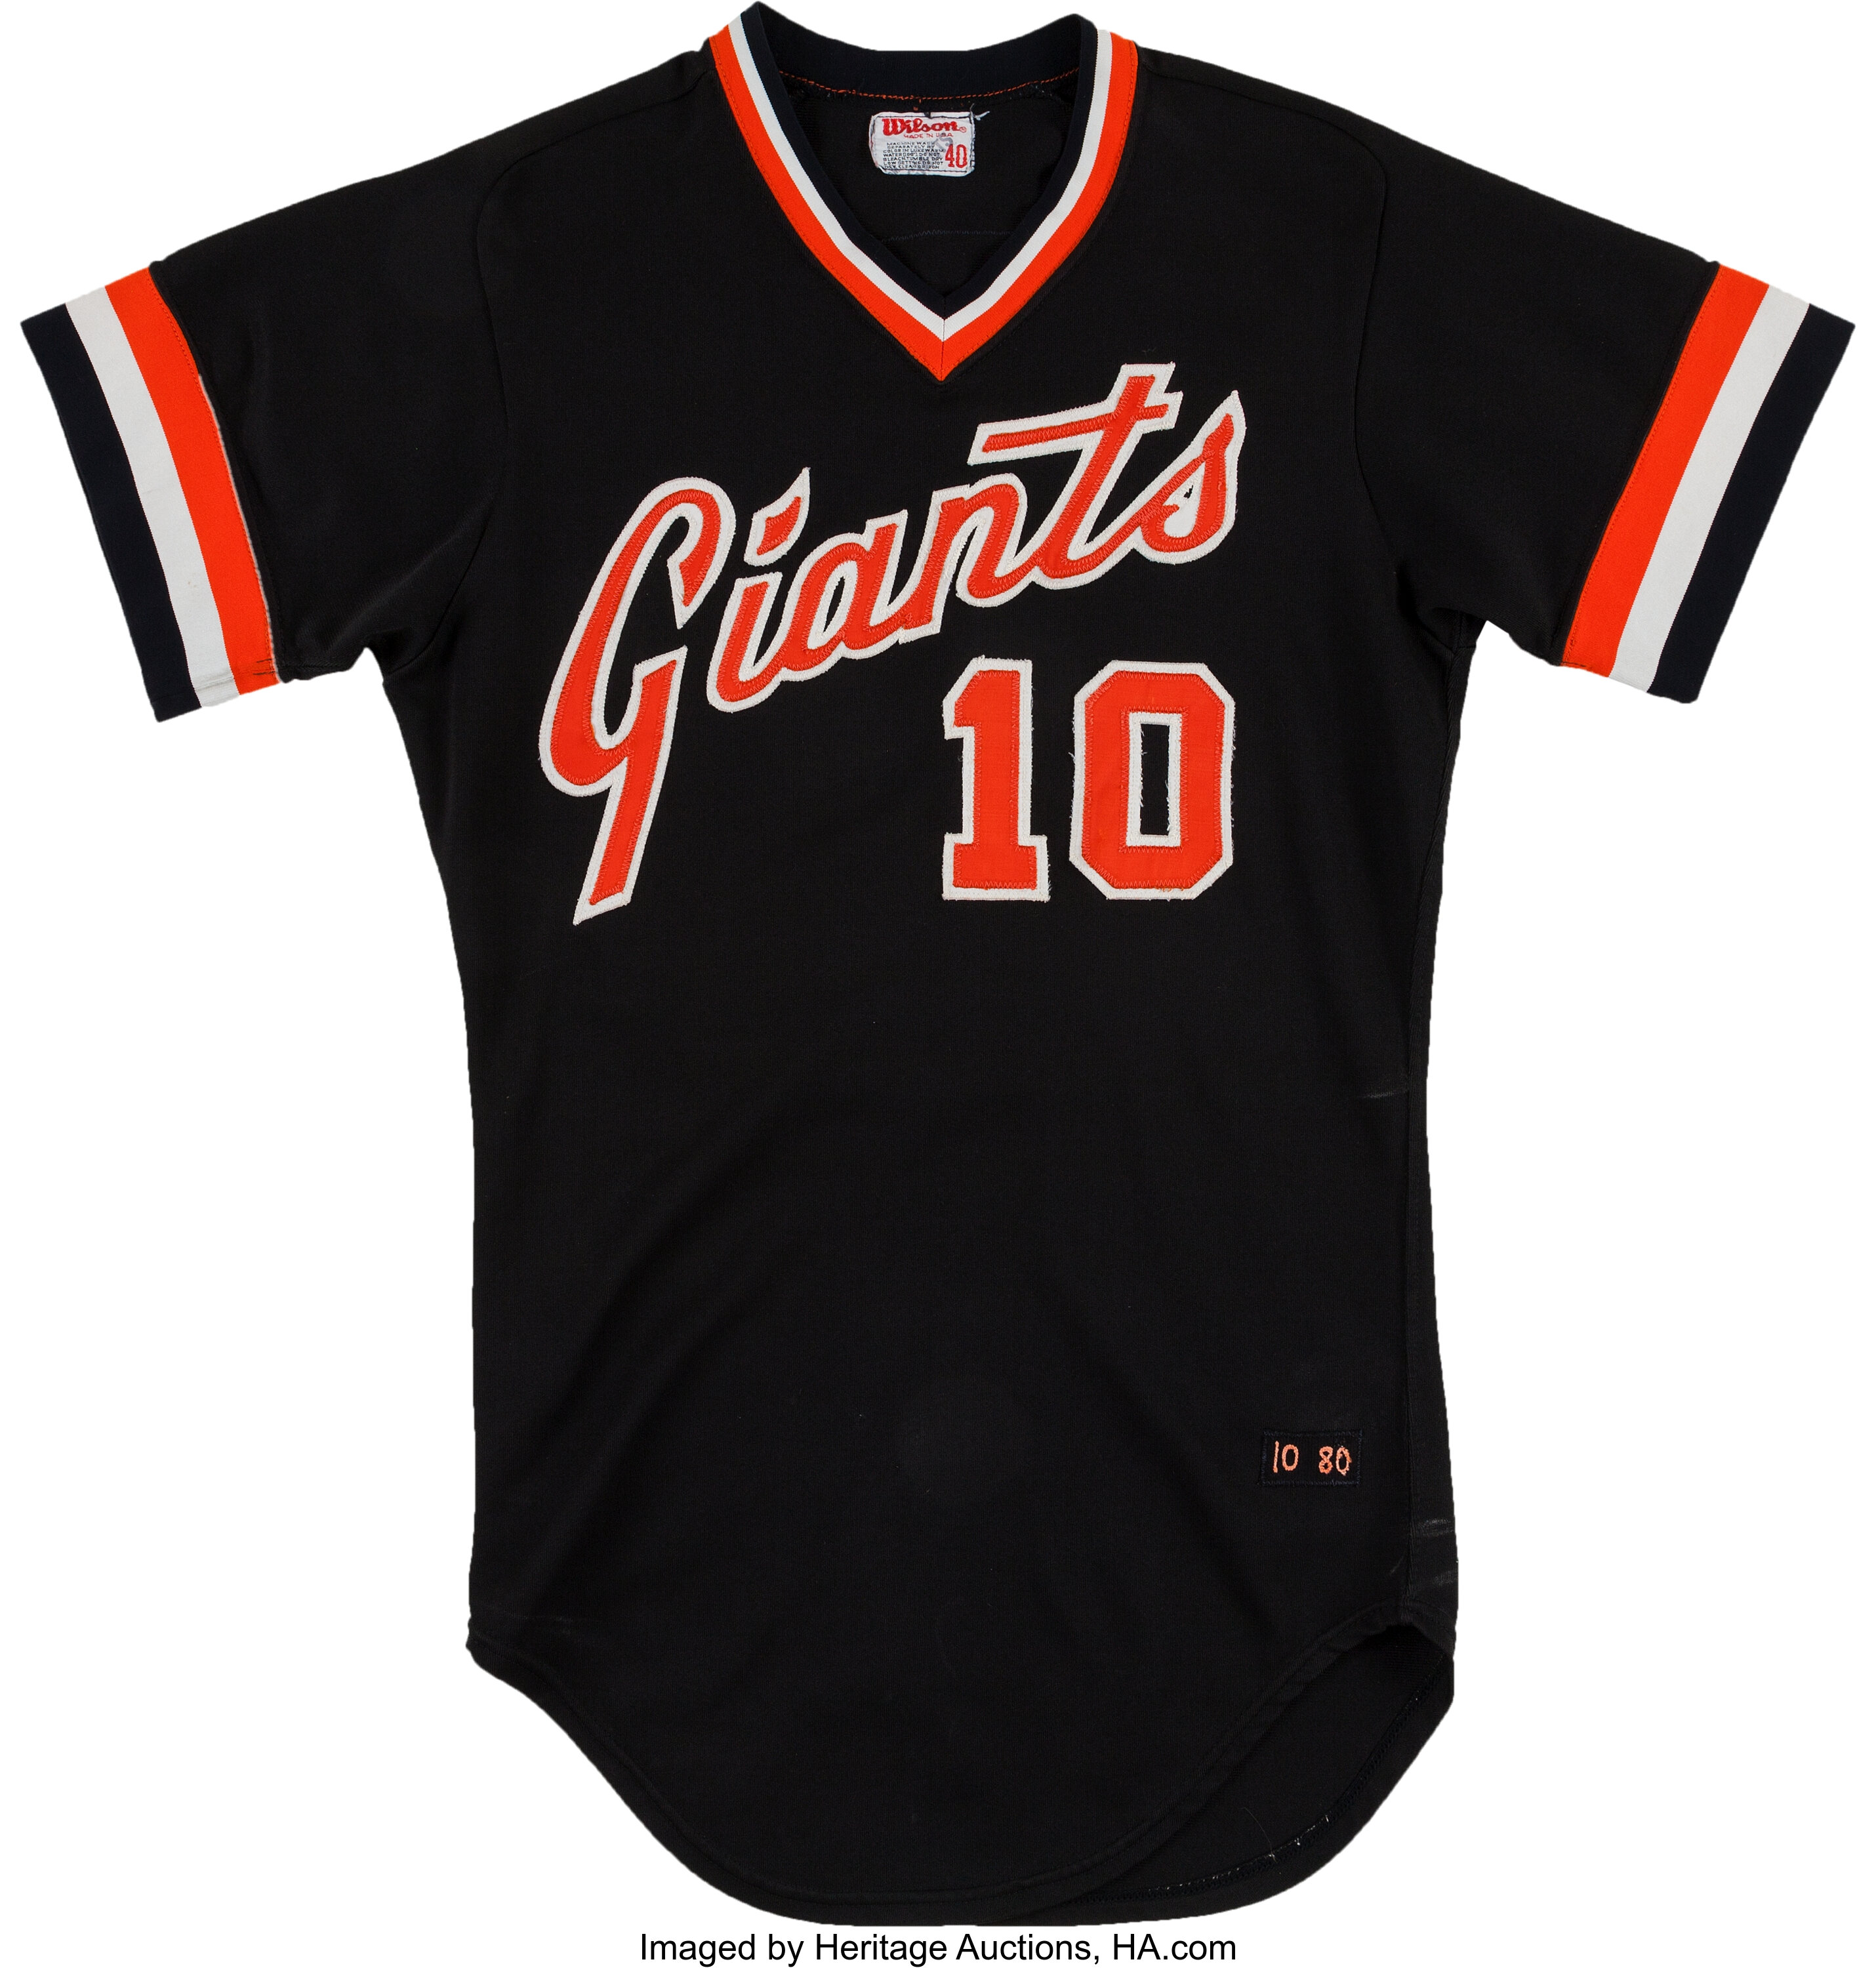 San Francisco Giants - 2017 Gigantes Road Jerseys - Game-Used on